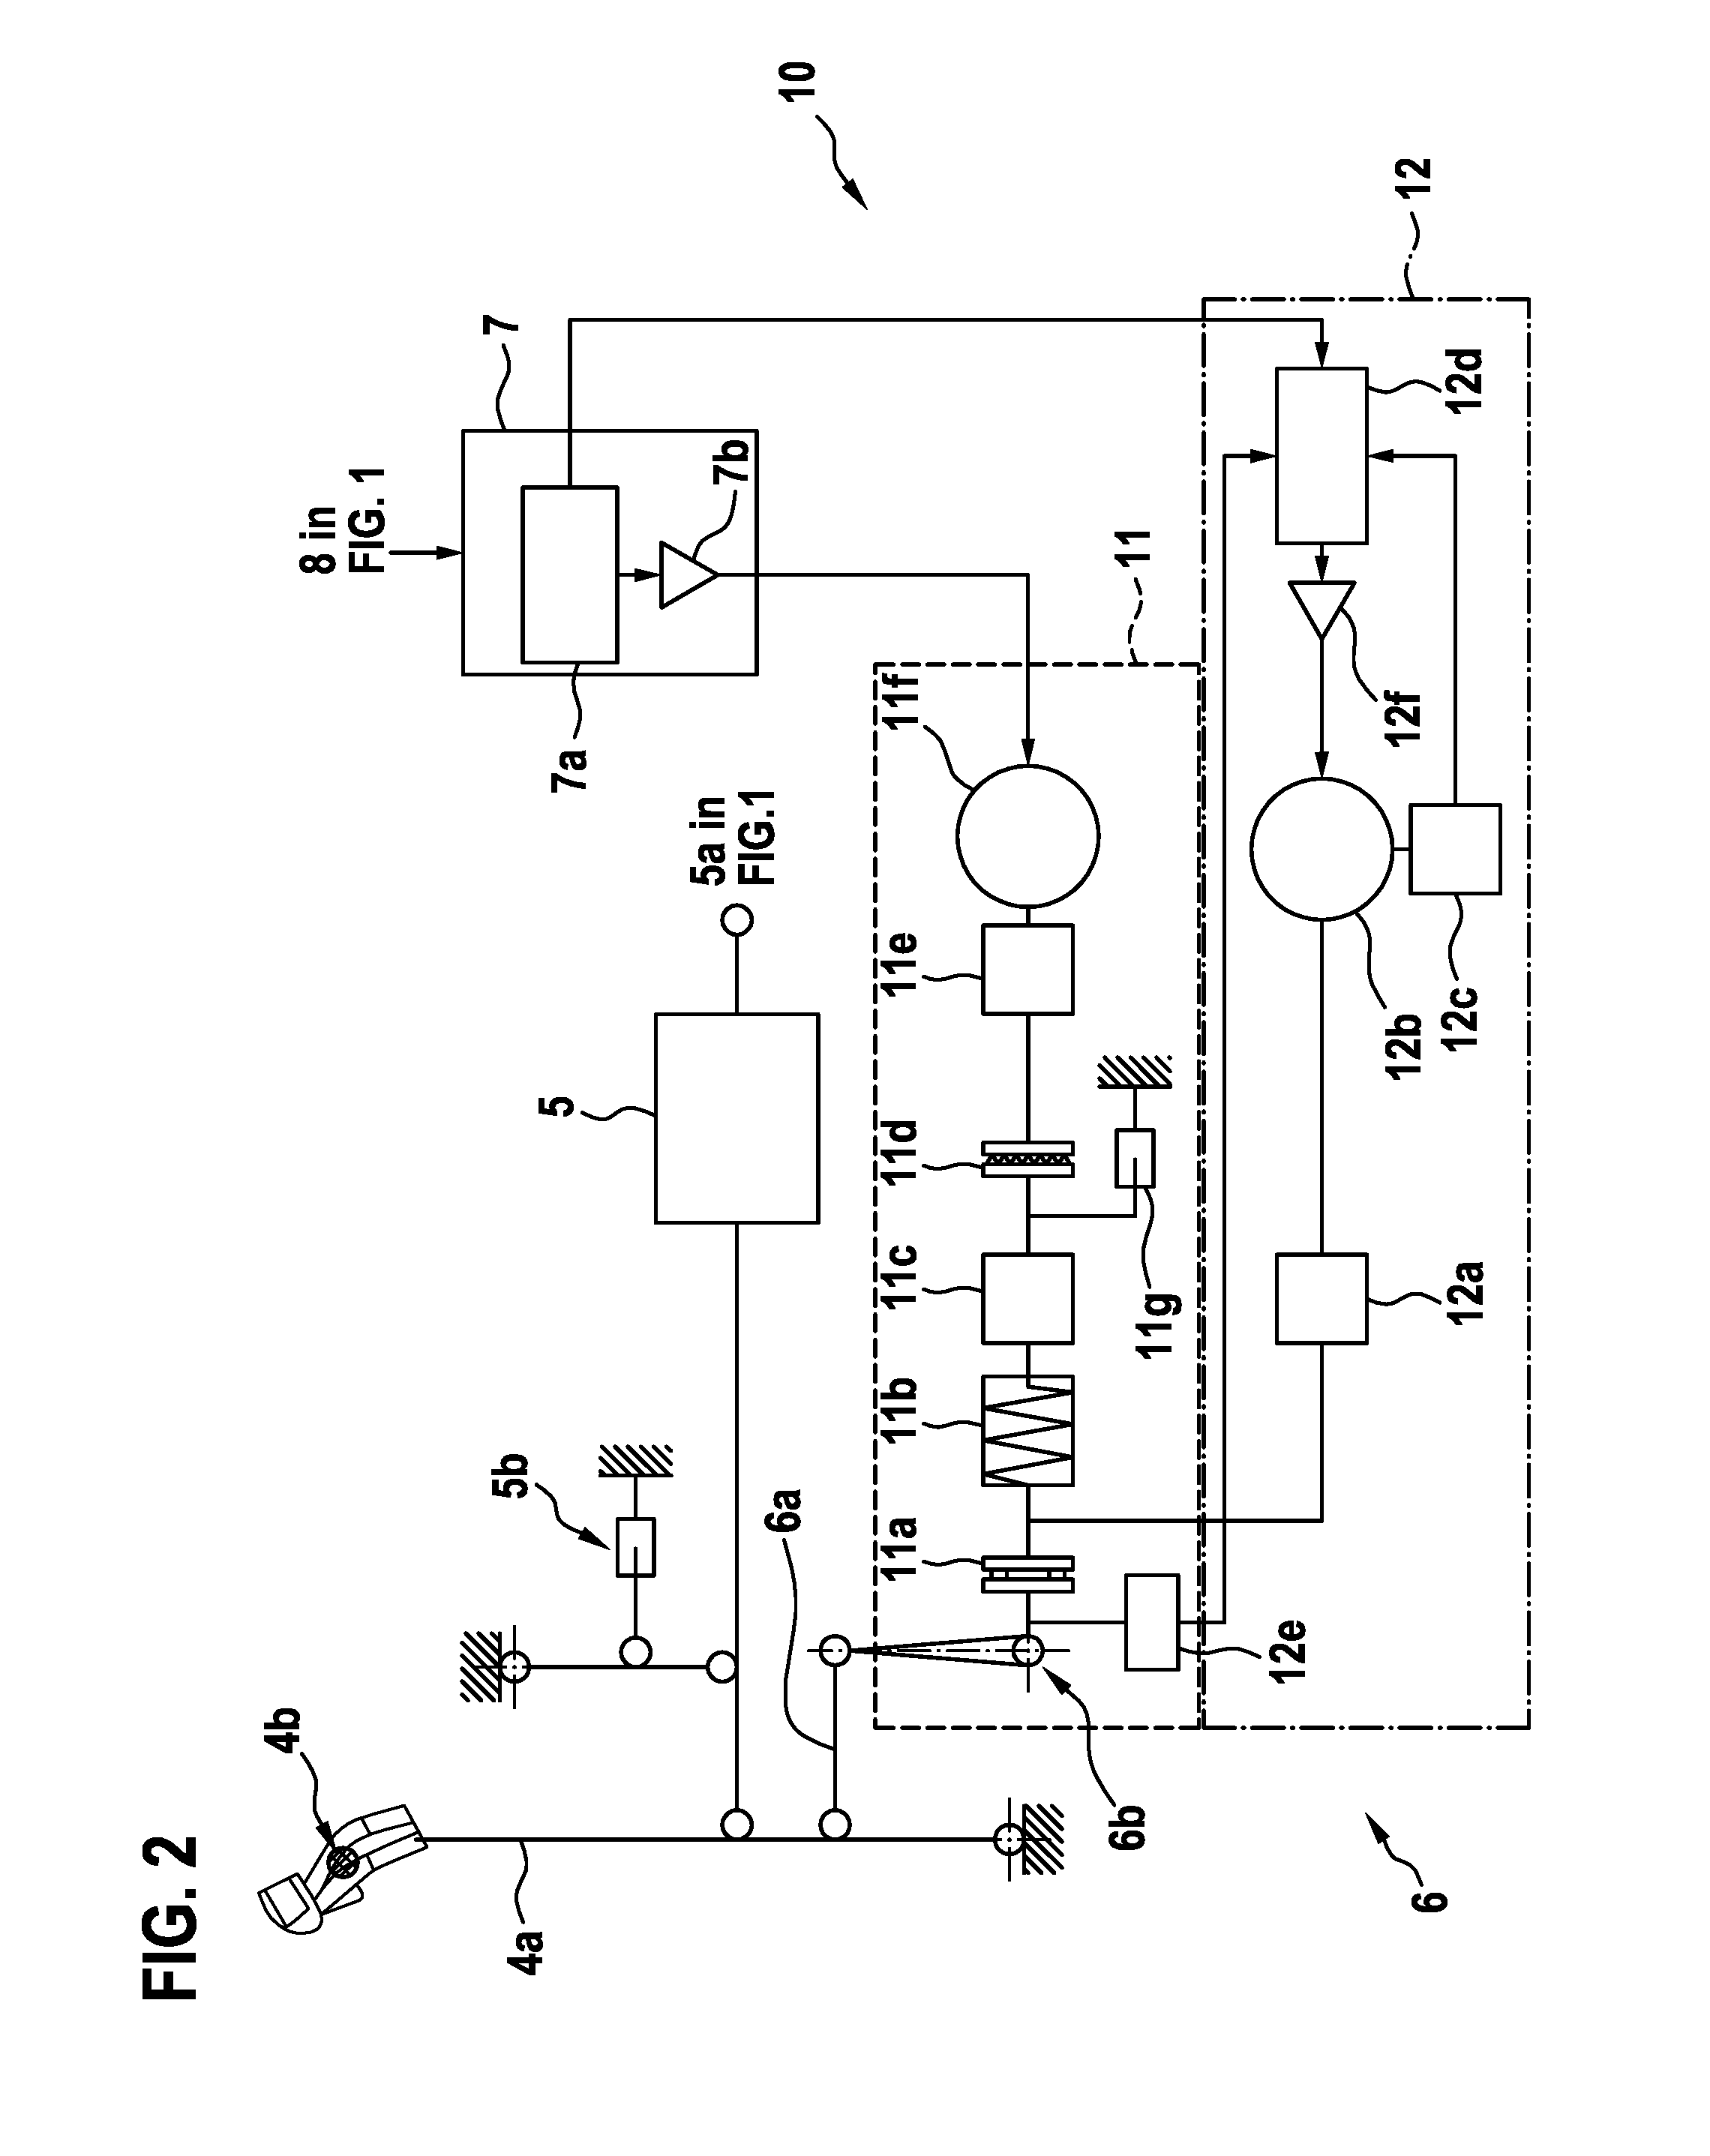 Artificial force feel generating device for a vehicle control system of a vehicle and, in particular, of an aircraft